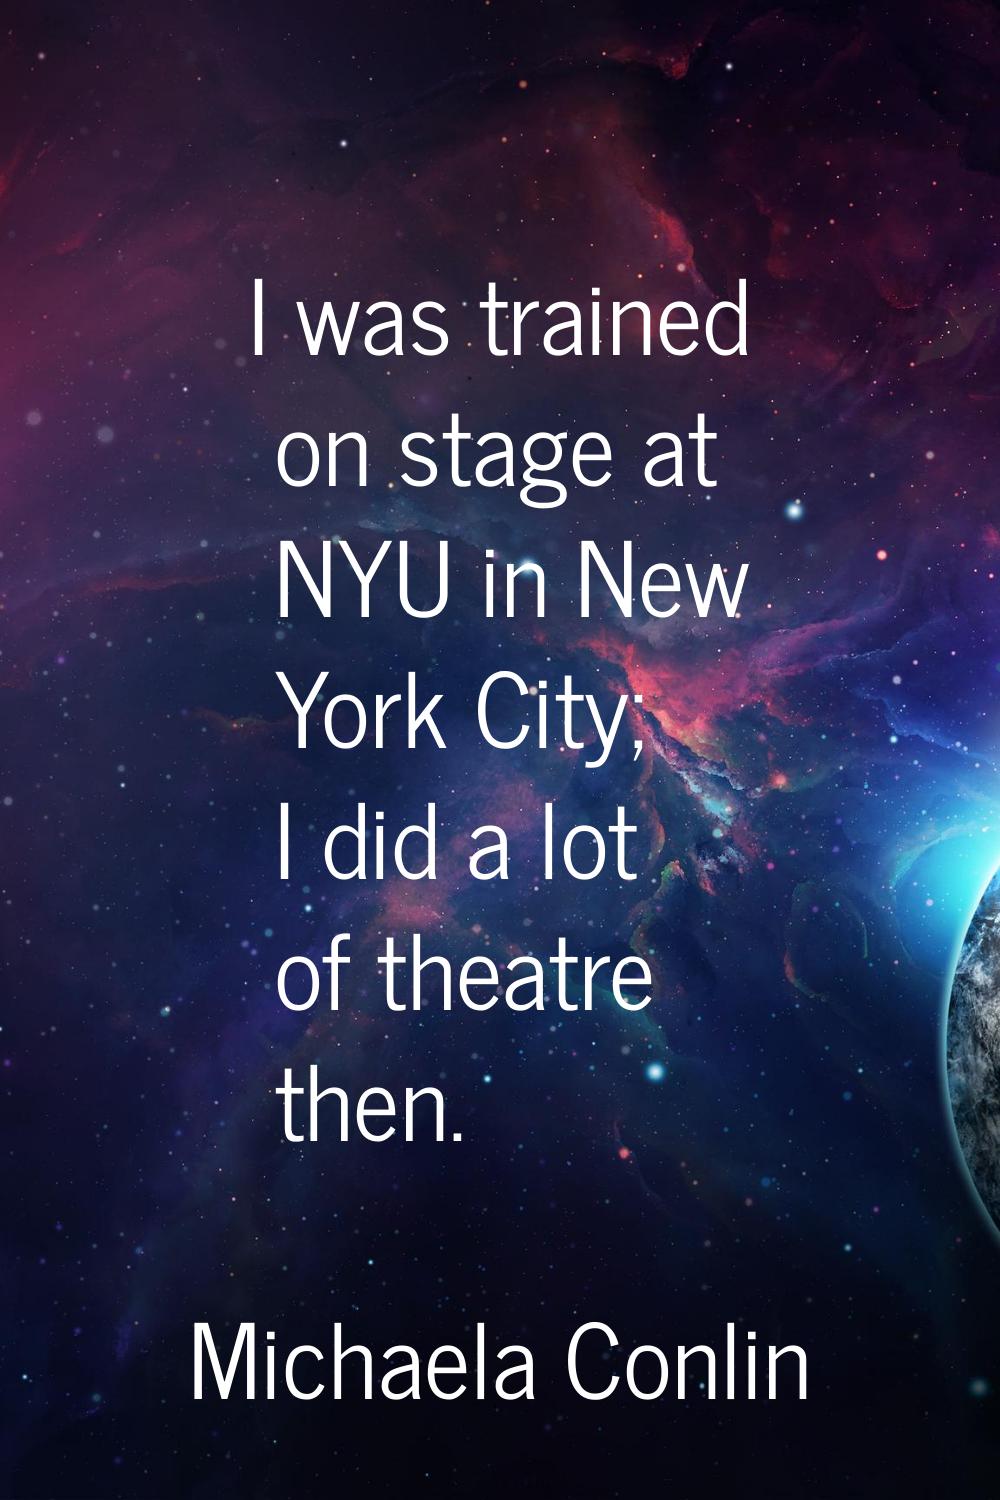 I was trained on stage at NYU in New York City; I did a lot of theatre then.